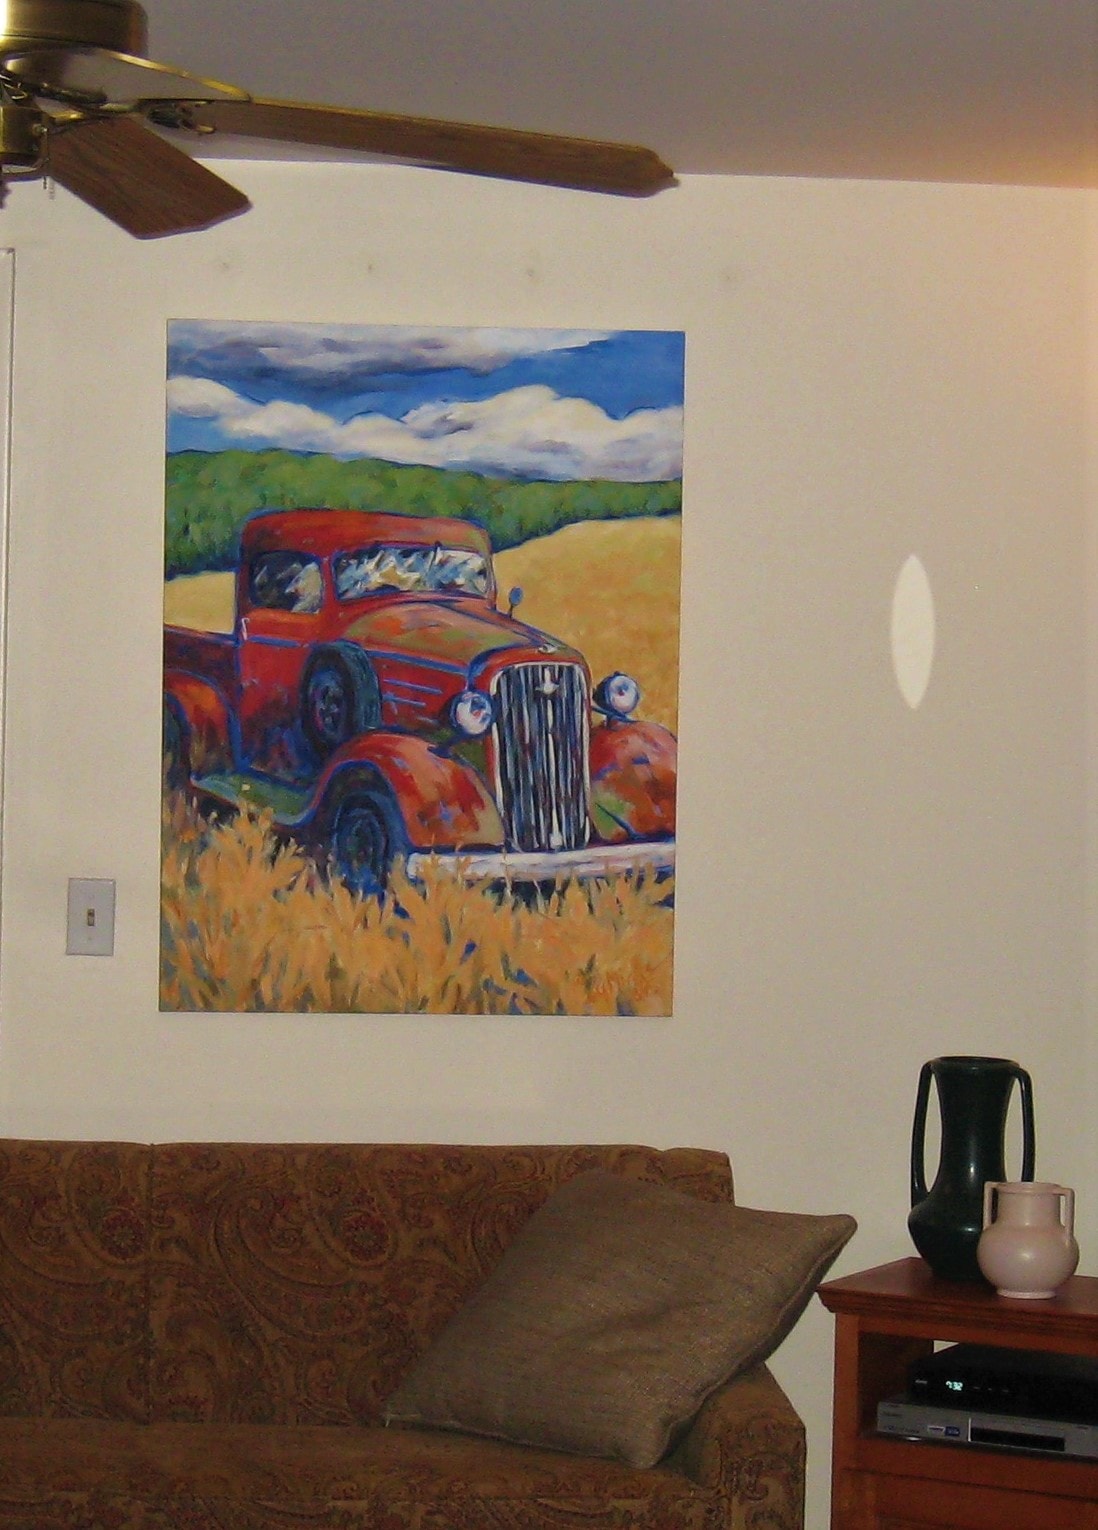 A painting of a red truck in a field displayed over a couch in a home